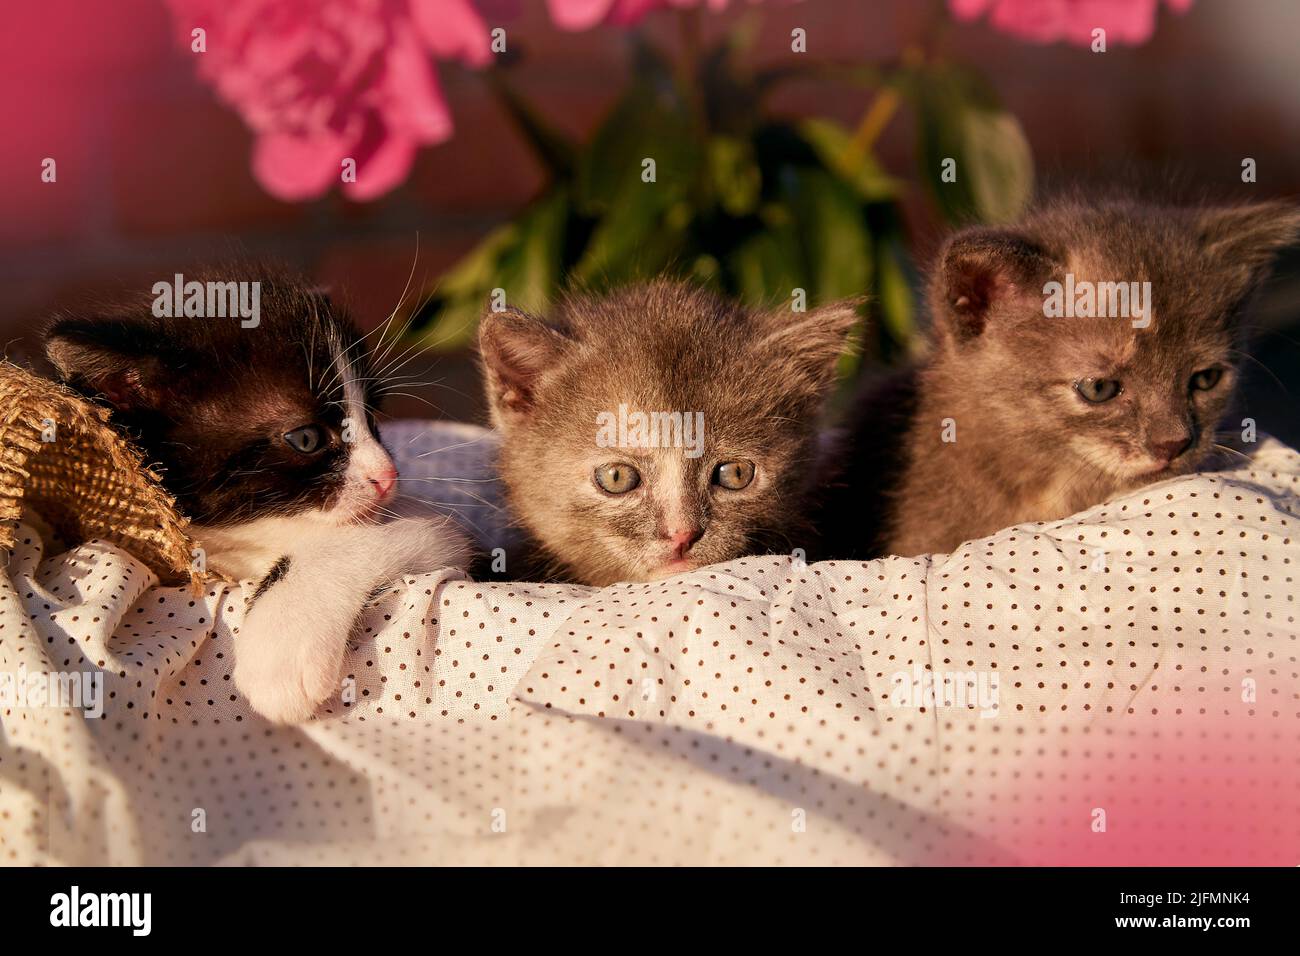 Cute domestic animals kittens among blooming peony. Adorable small animal at summertime. Discovery and curiosity childhood. Summer aesthetic background Stock Photo